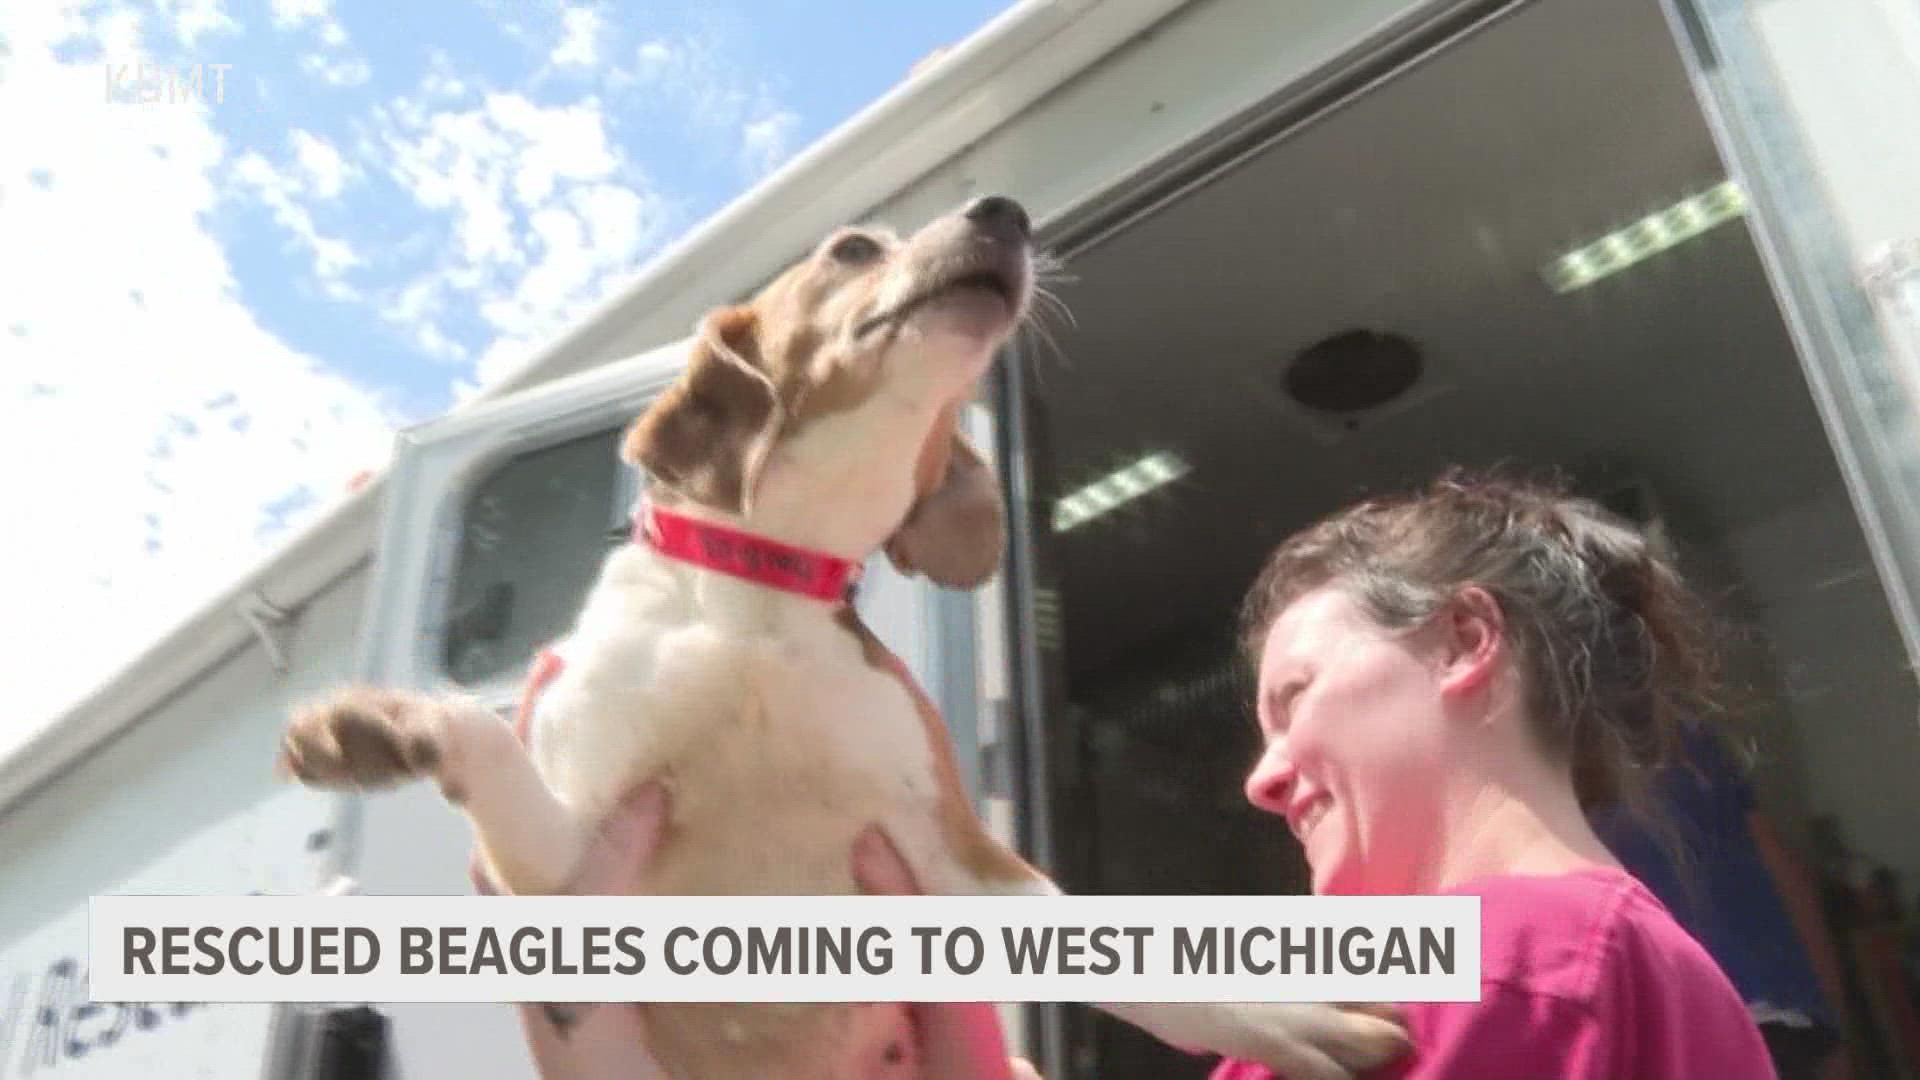 More than two dozen dogs are headed to a West Michigan animal shelter after thousands were rescued from a shutdown breeding facility in Virginia.